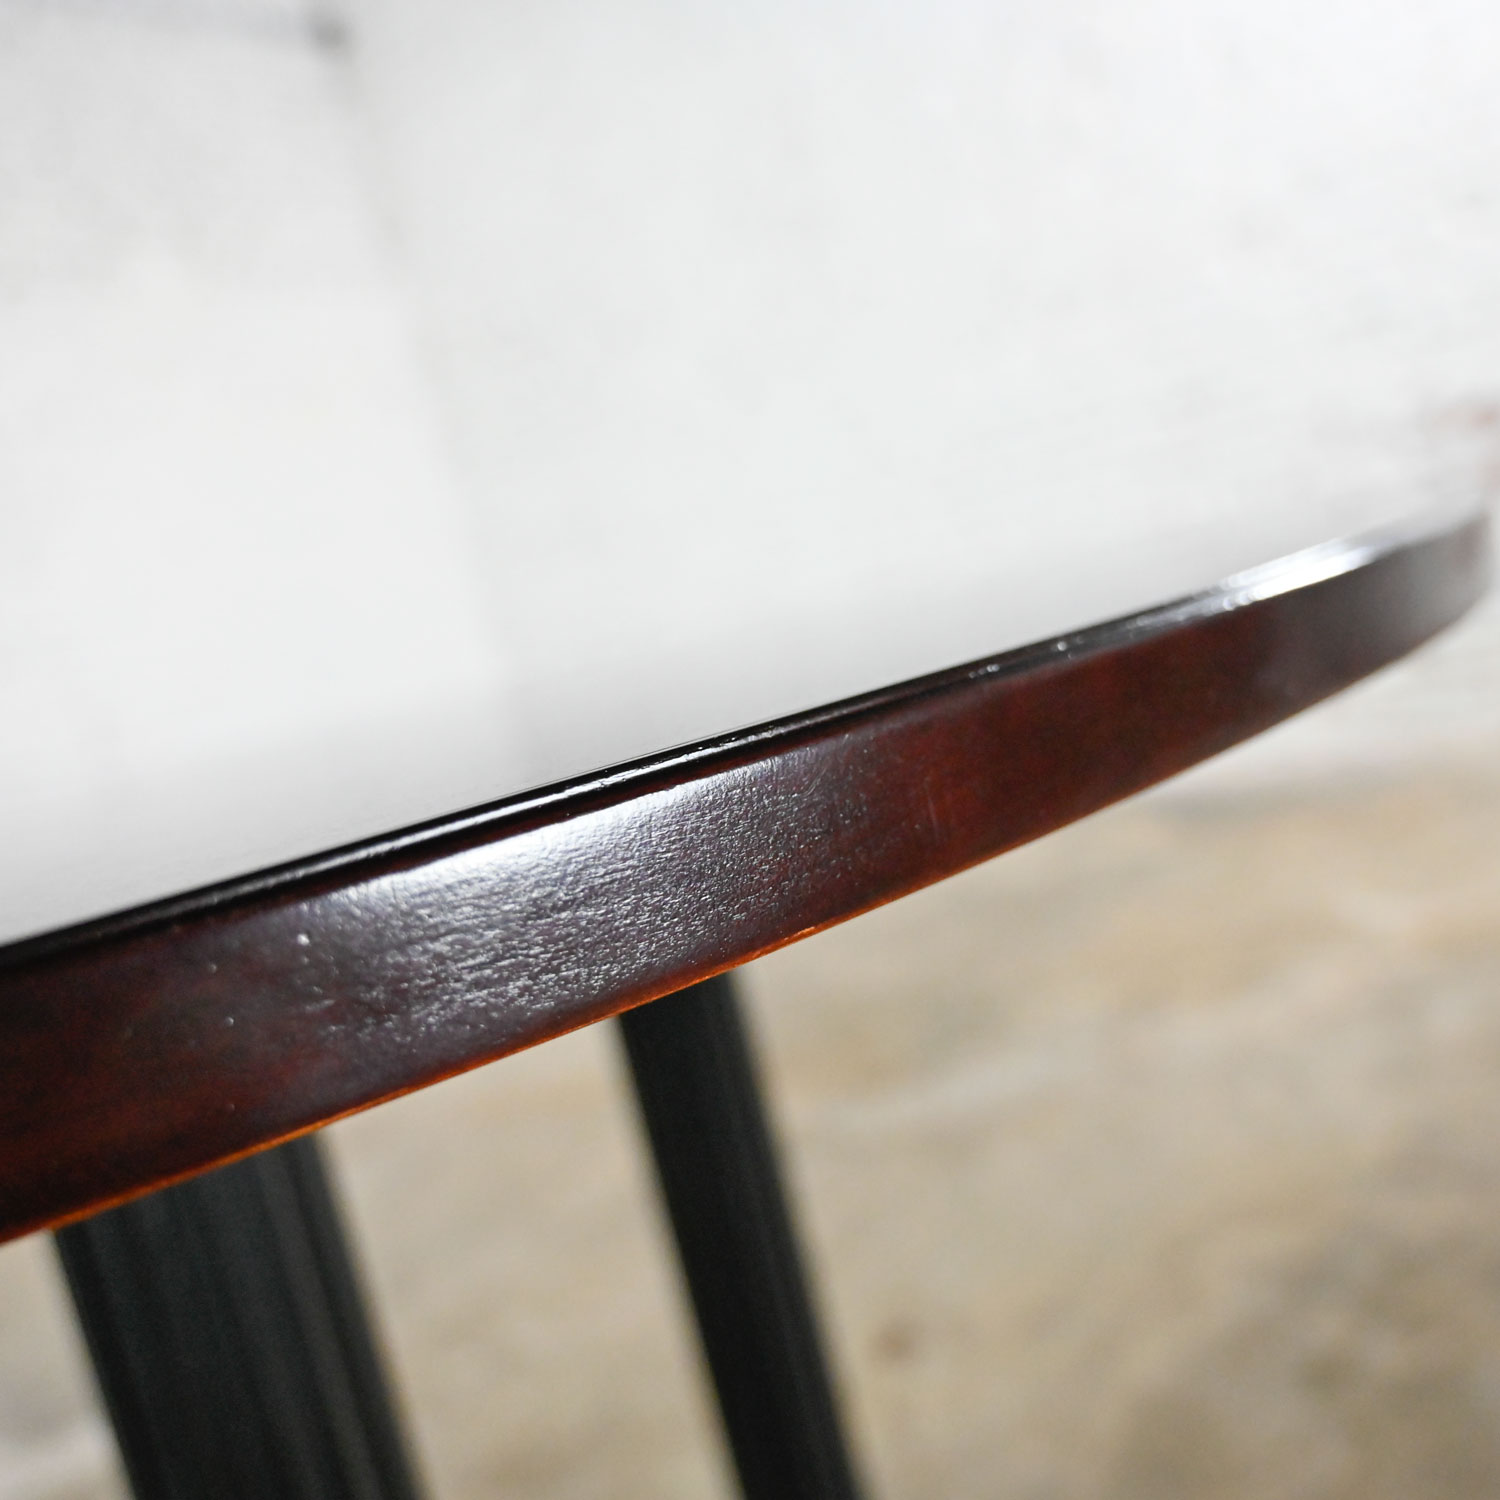 Vintage Modern Dark Cherry Finish Round Top Table with 4 Large Black Metal Fluted Cylinder Legs